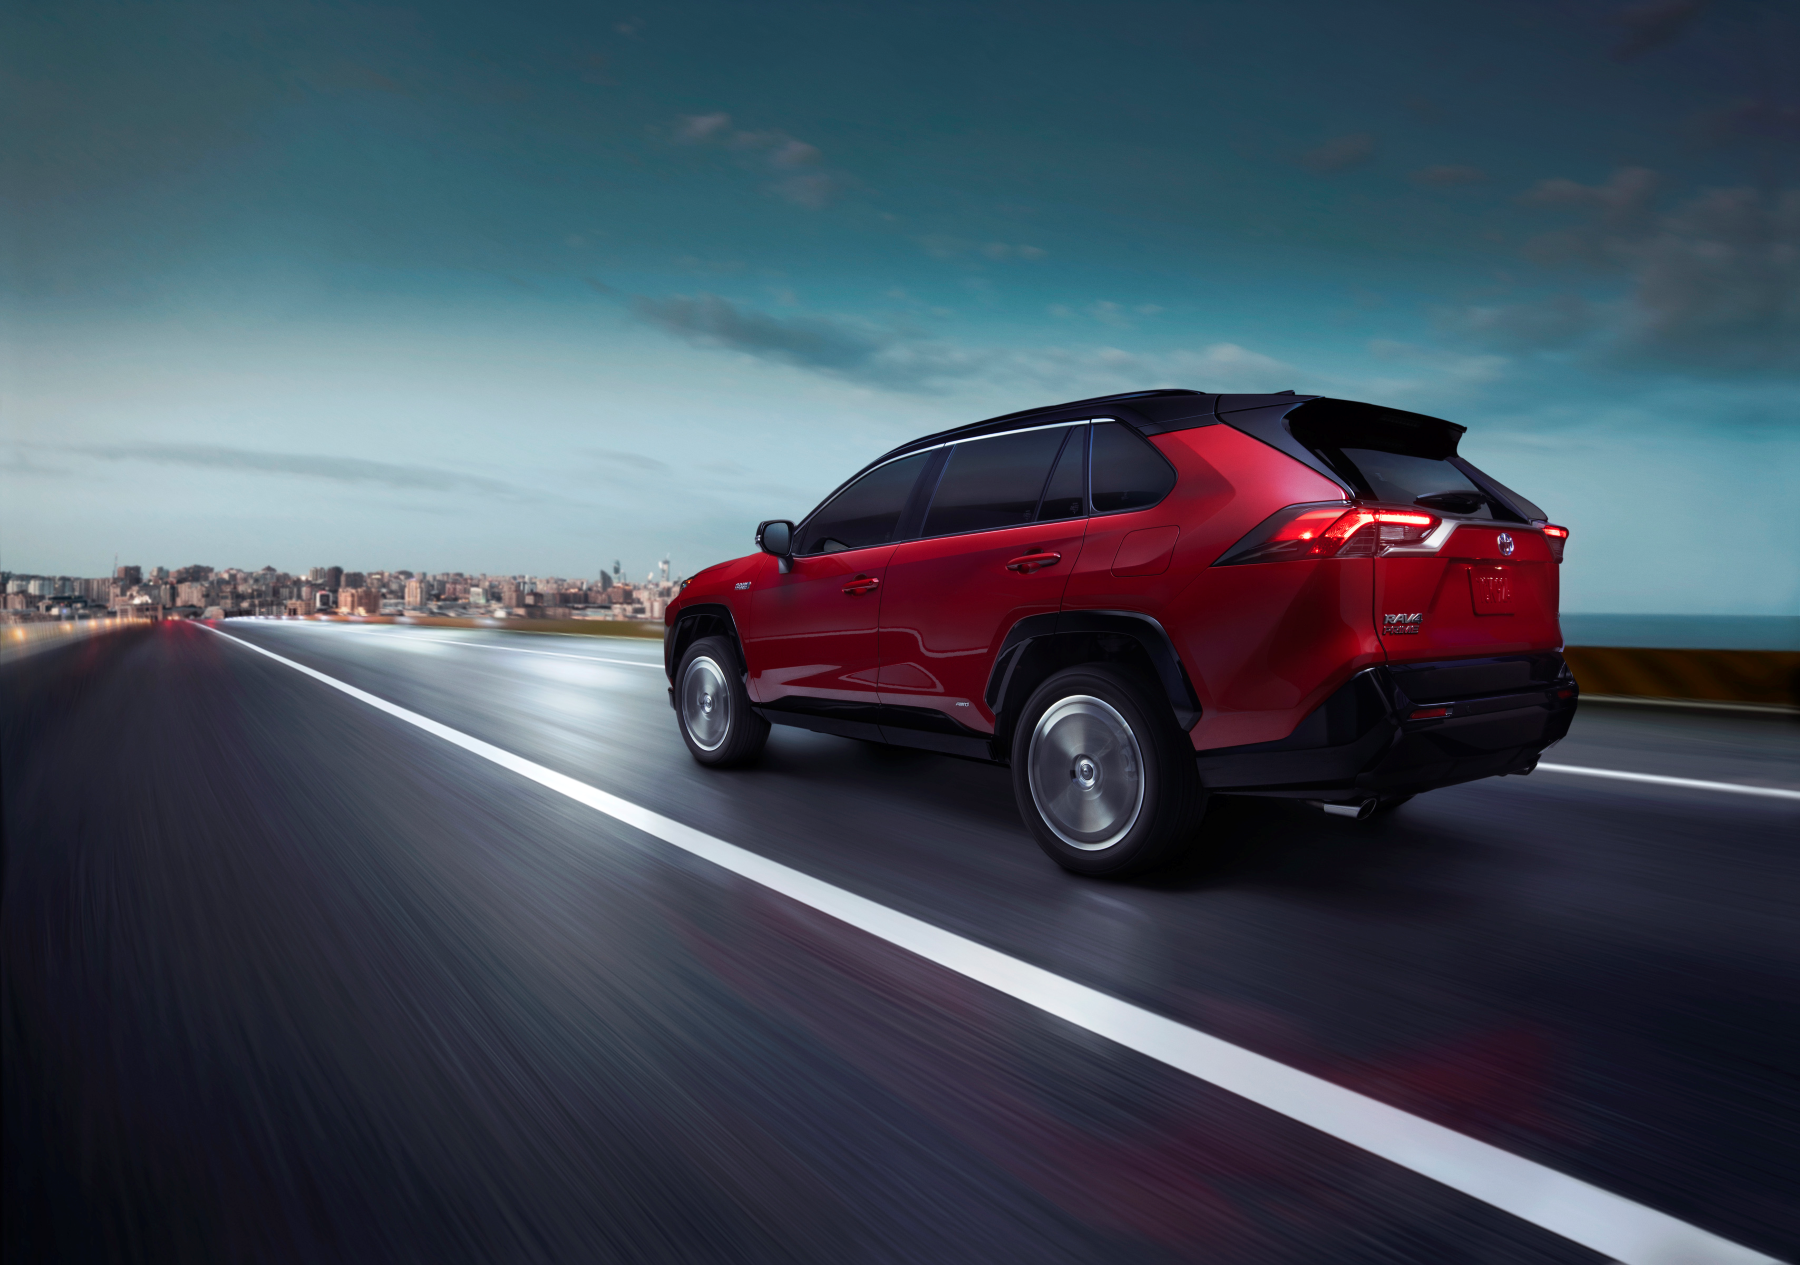 The 2021 Toyota RAV4 Prime PHEV SUV in dark red driving down a highway toward an urban city